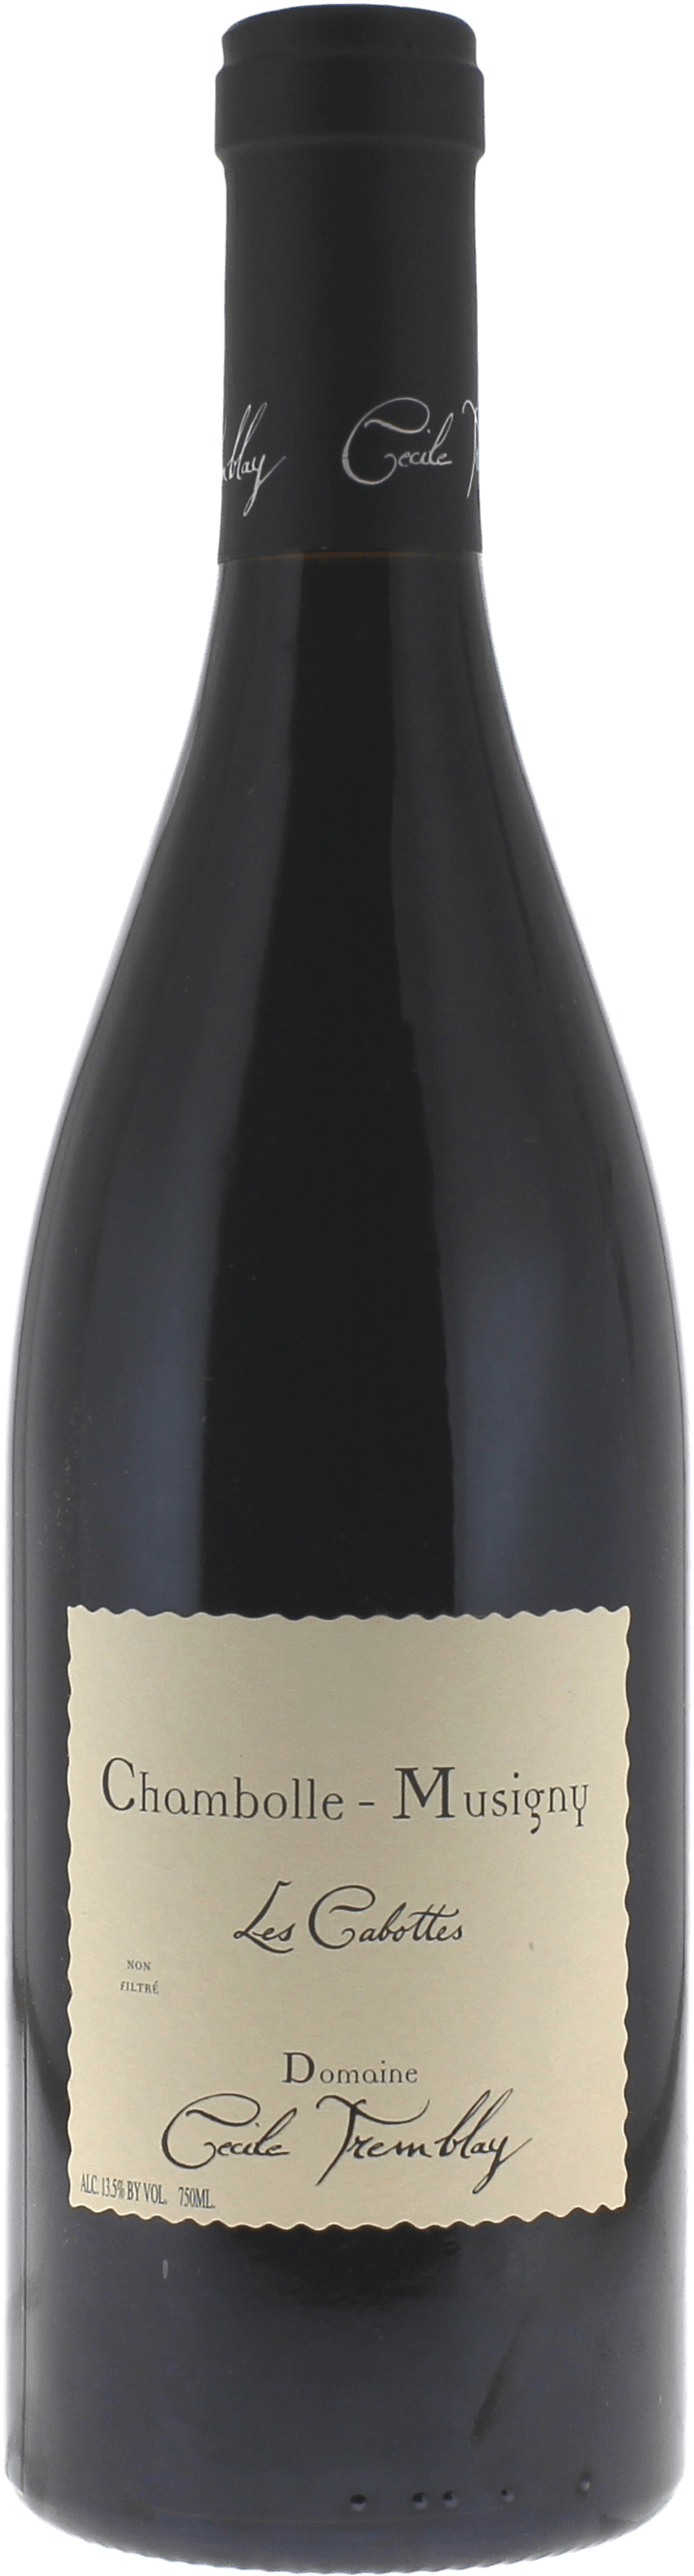 Chambolle musigny les cabottes 2012 Domaine TREMBLAY Cecile, Bourgogne rouge